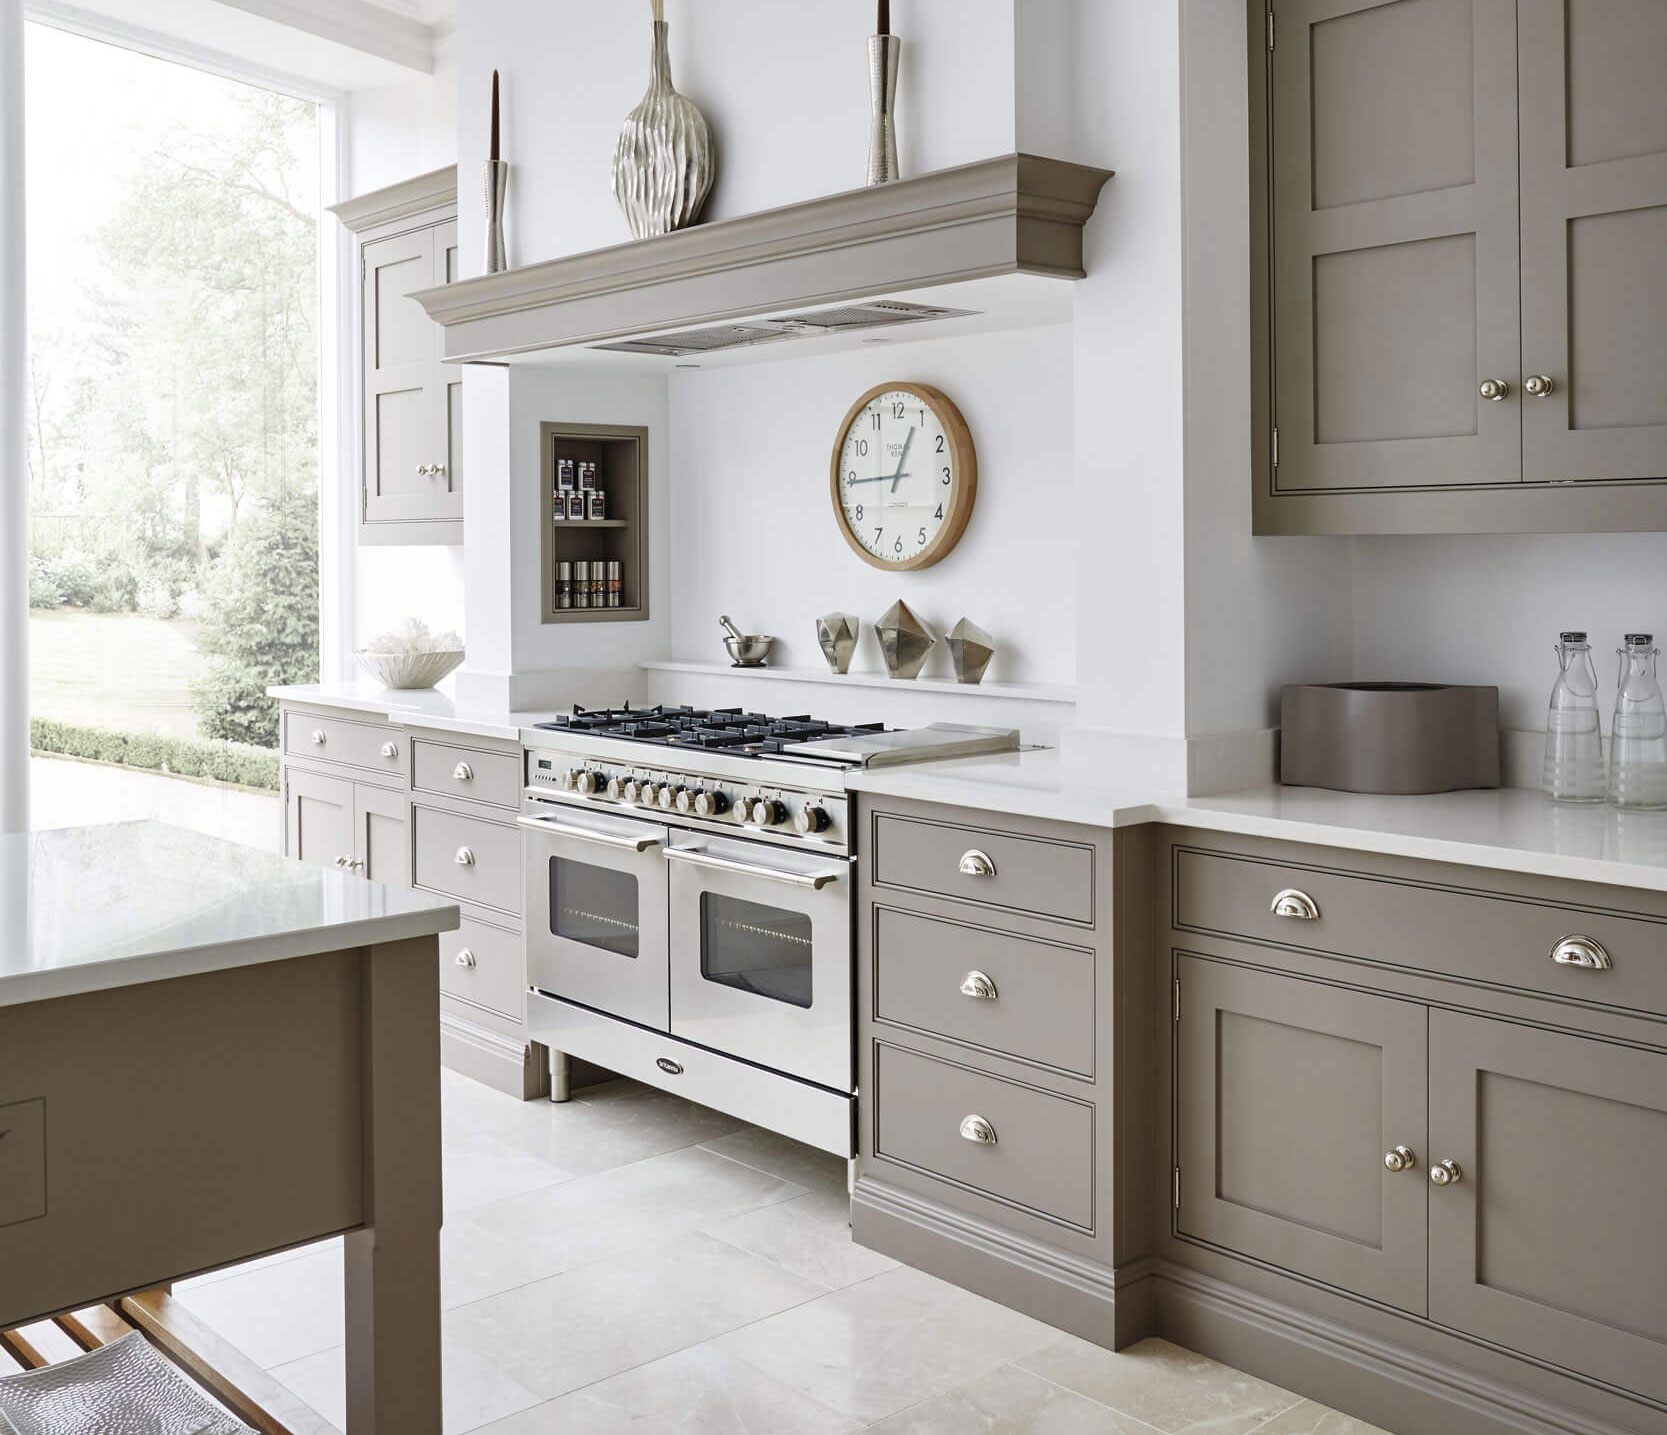 Grey and White Kitchen | Tom Howley